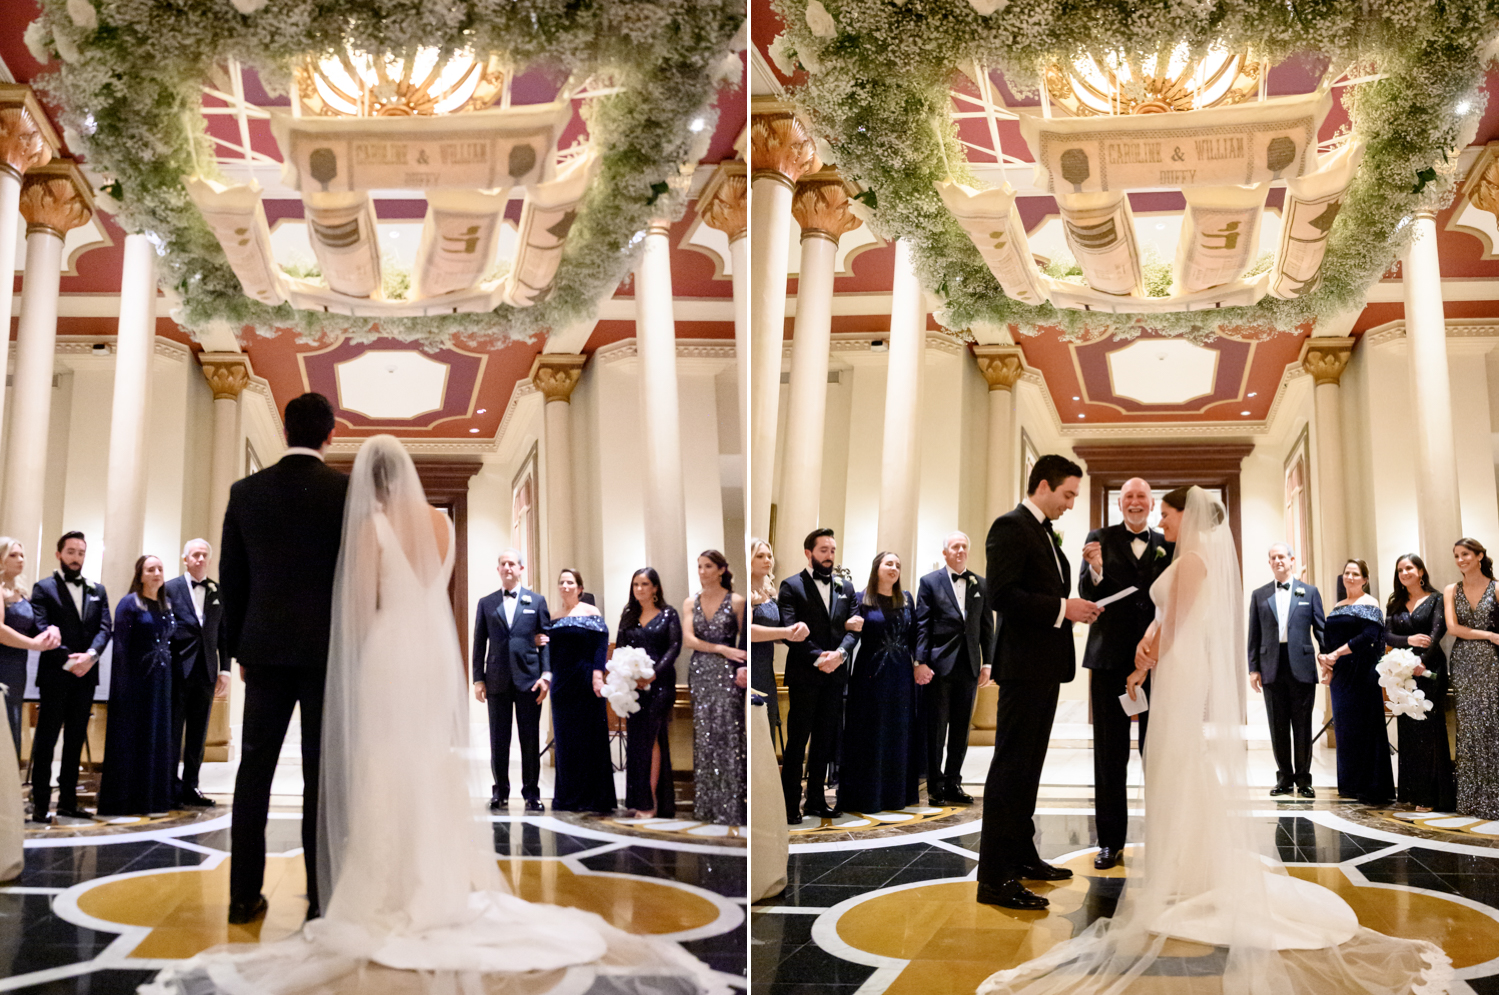 Left: the bride leans on the grooms shoulder at the altar. Right: the bride and groom face each other, laughing at the altar.